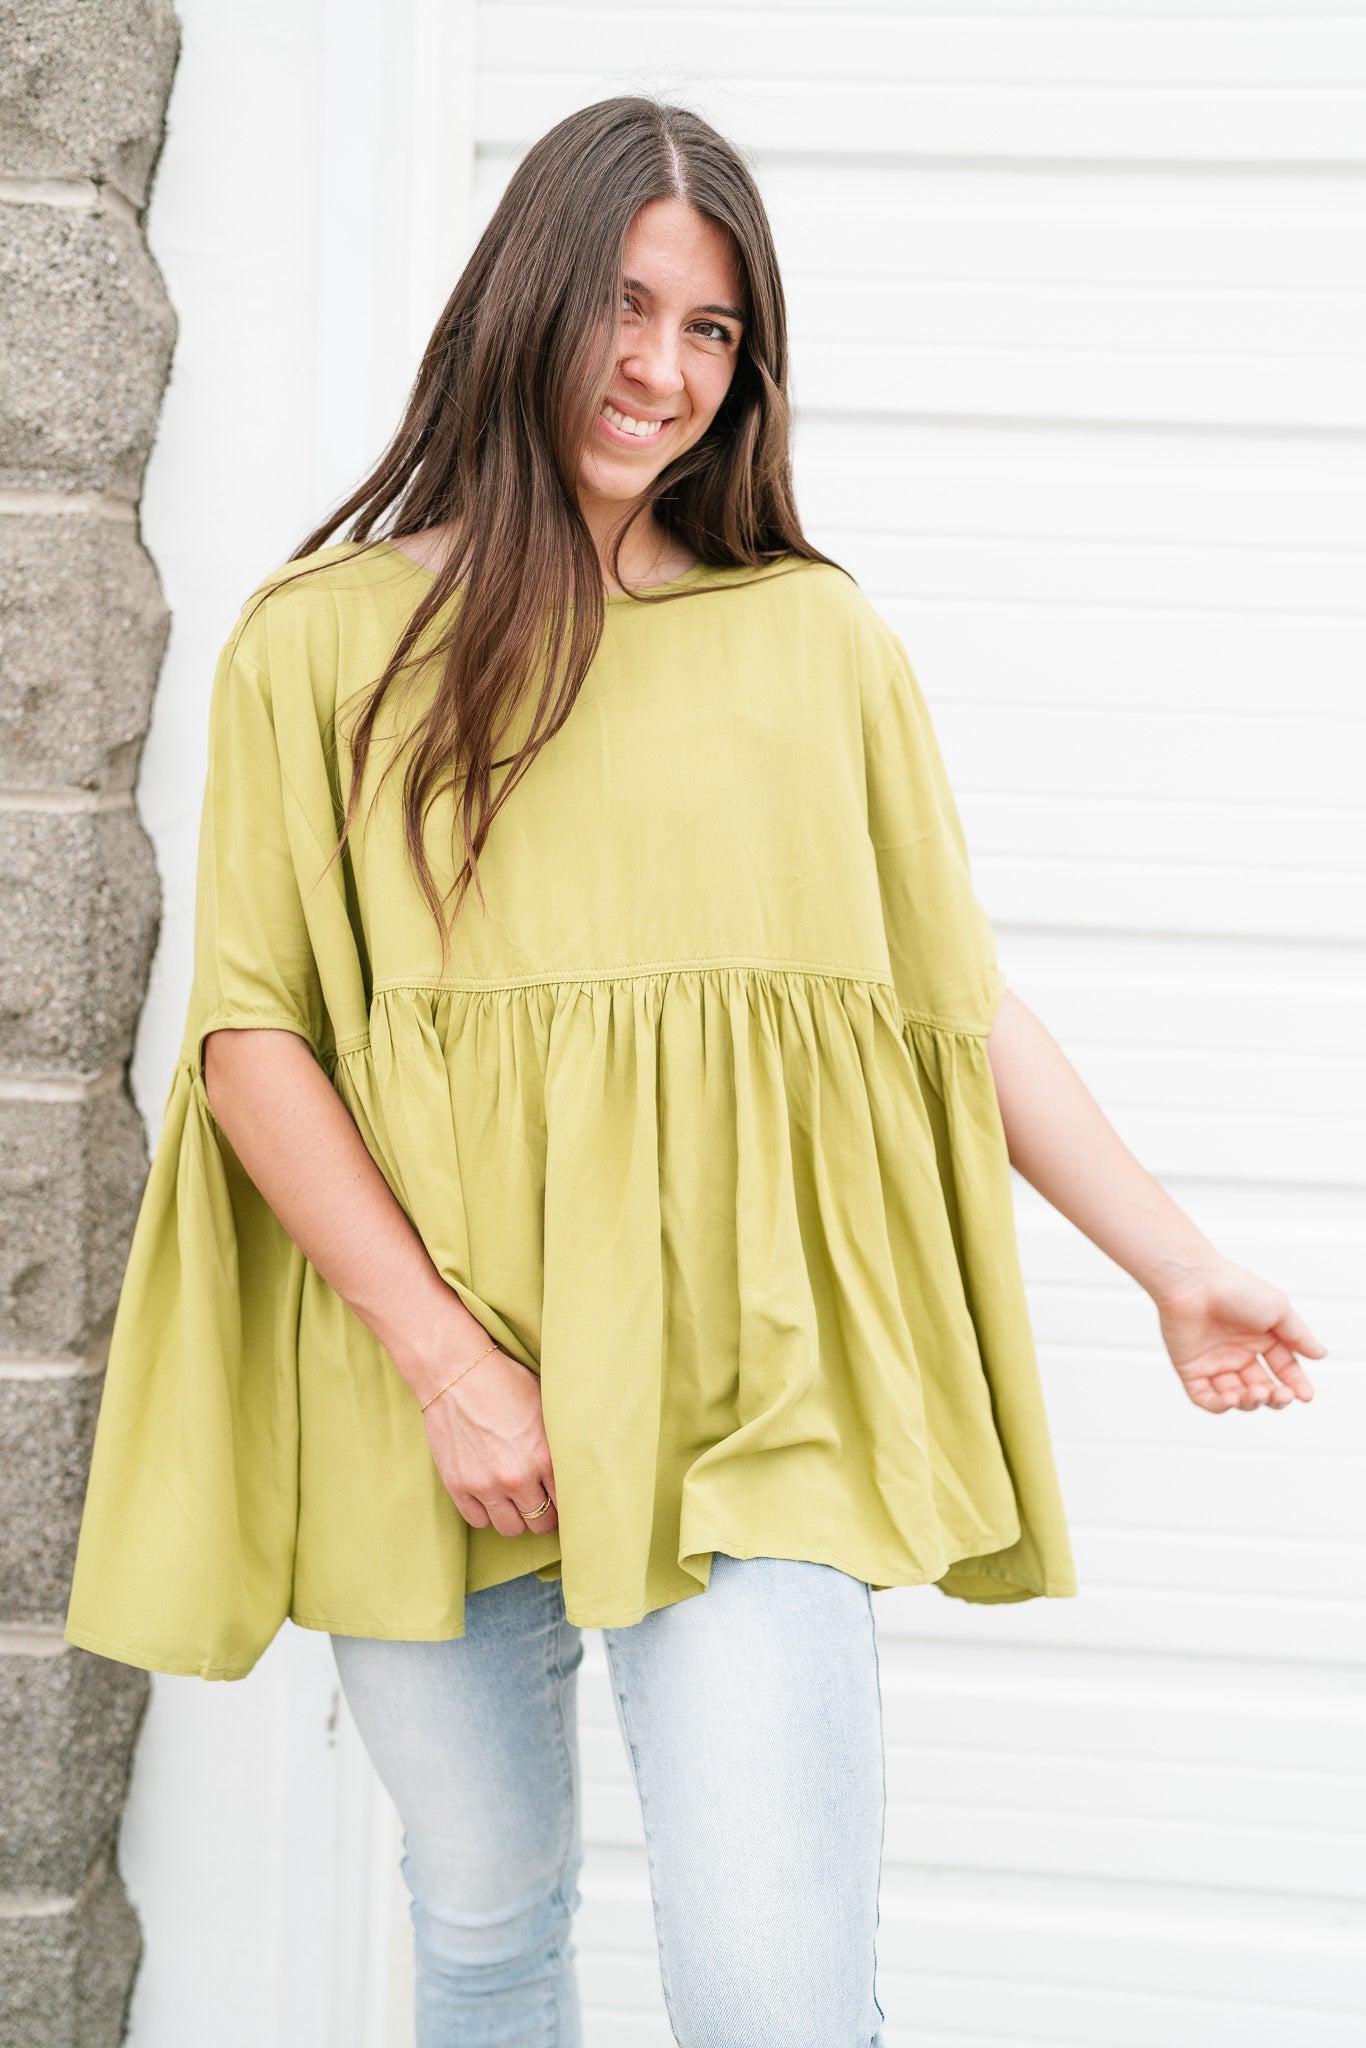 Literally Lime Babydoll Top